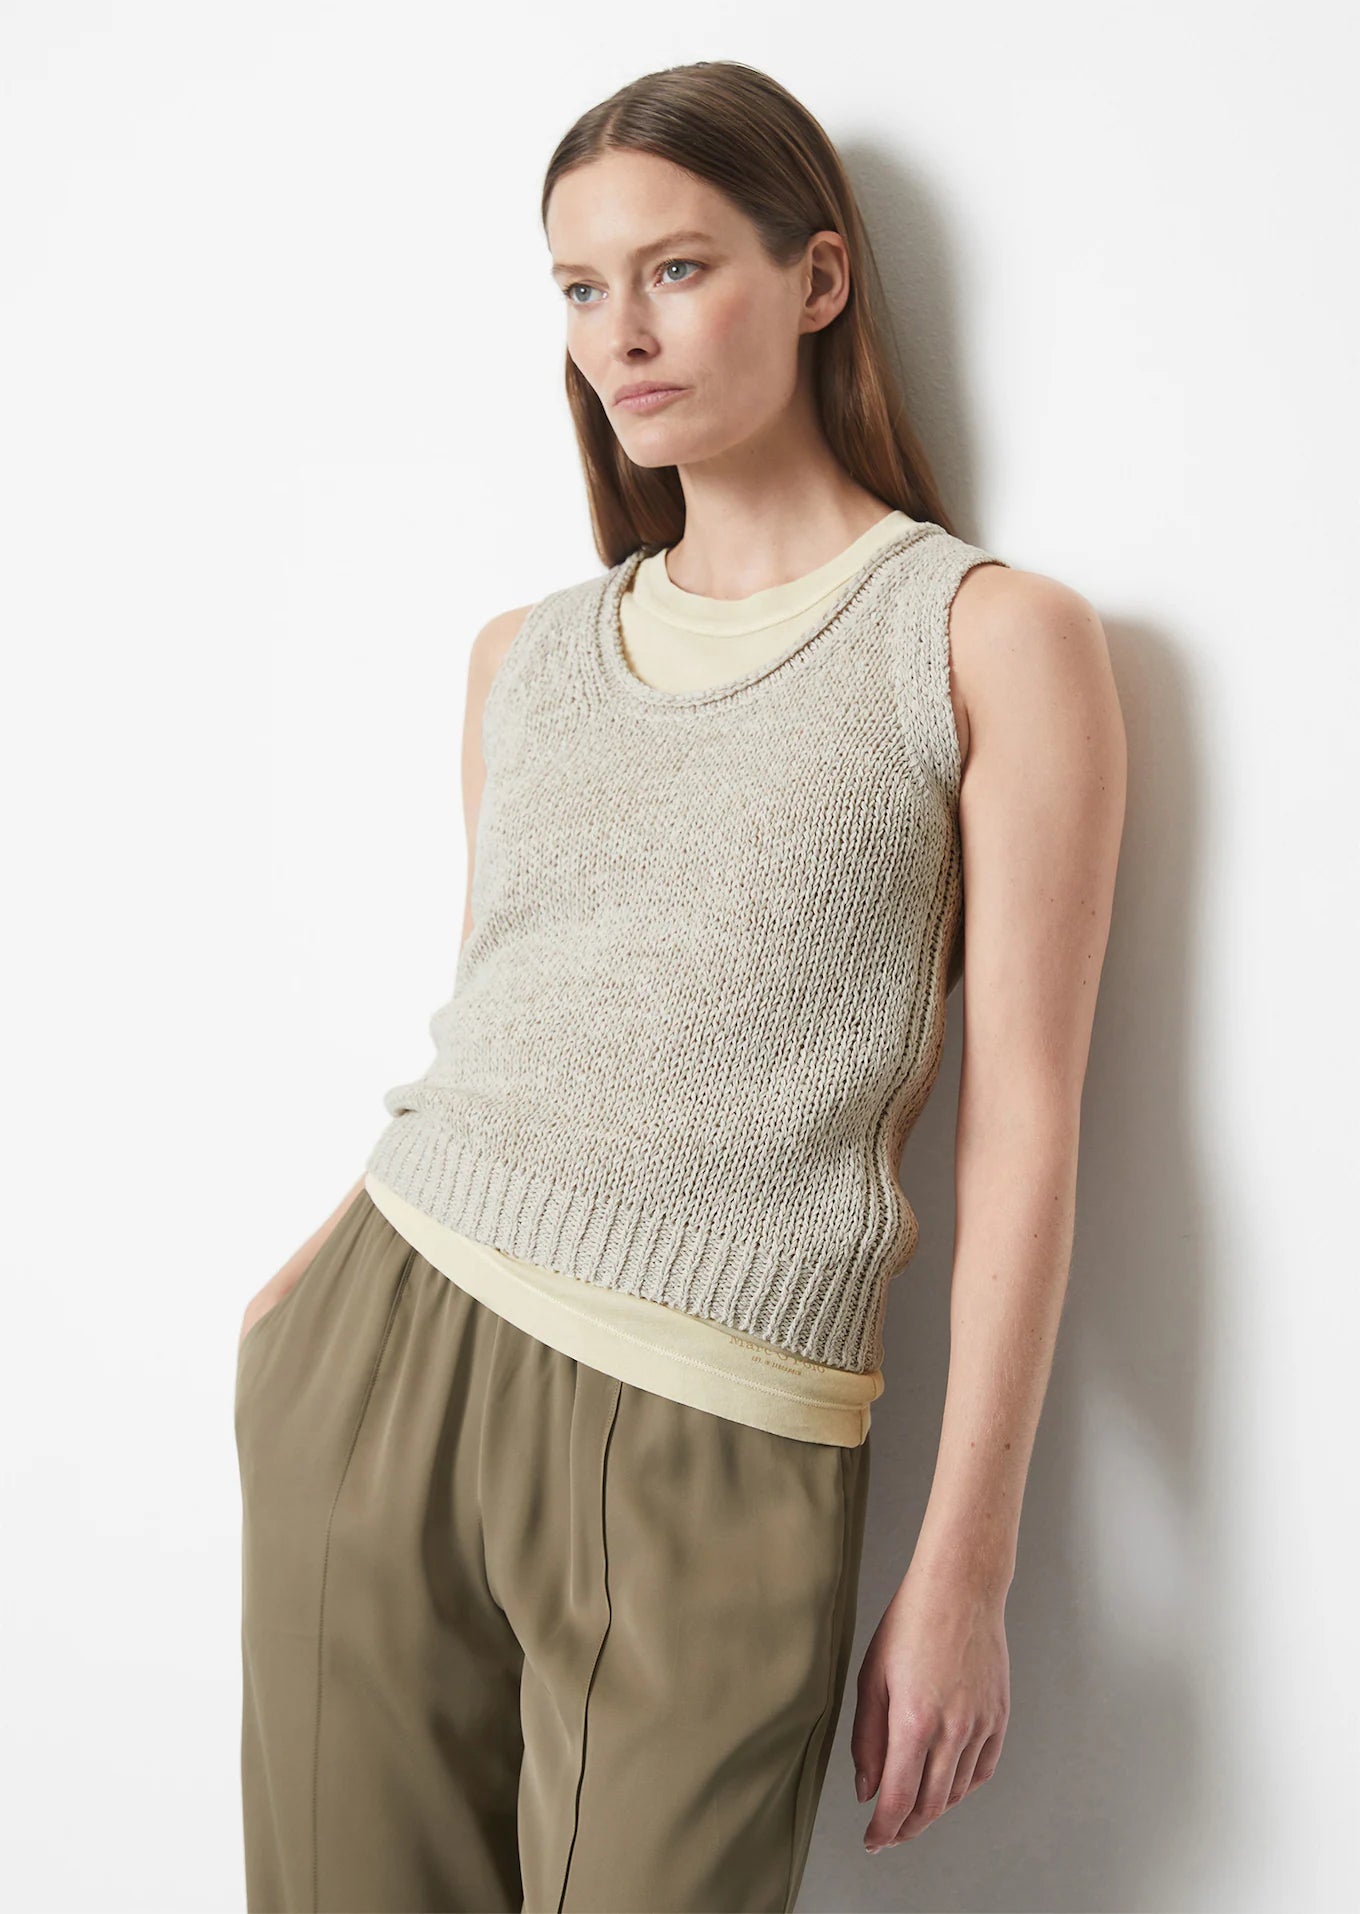 Knitted Vest Top in Stone Grey